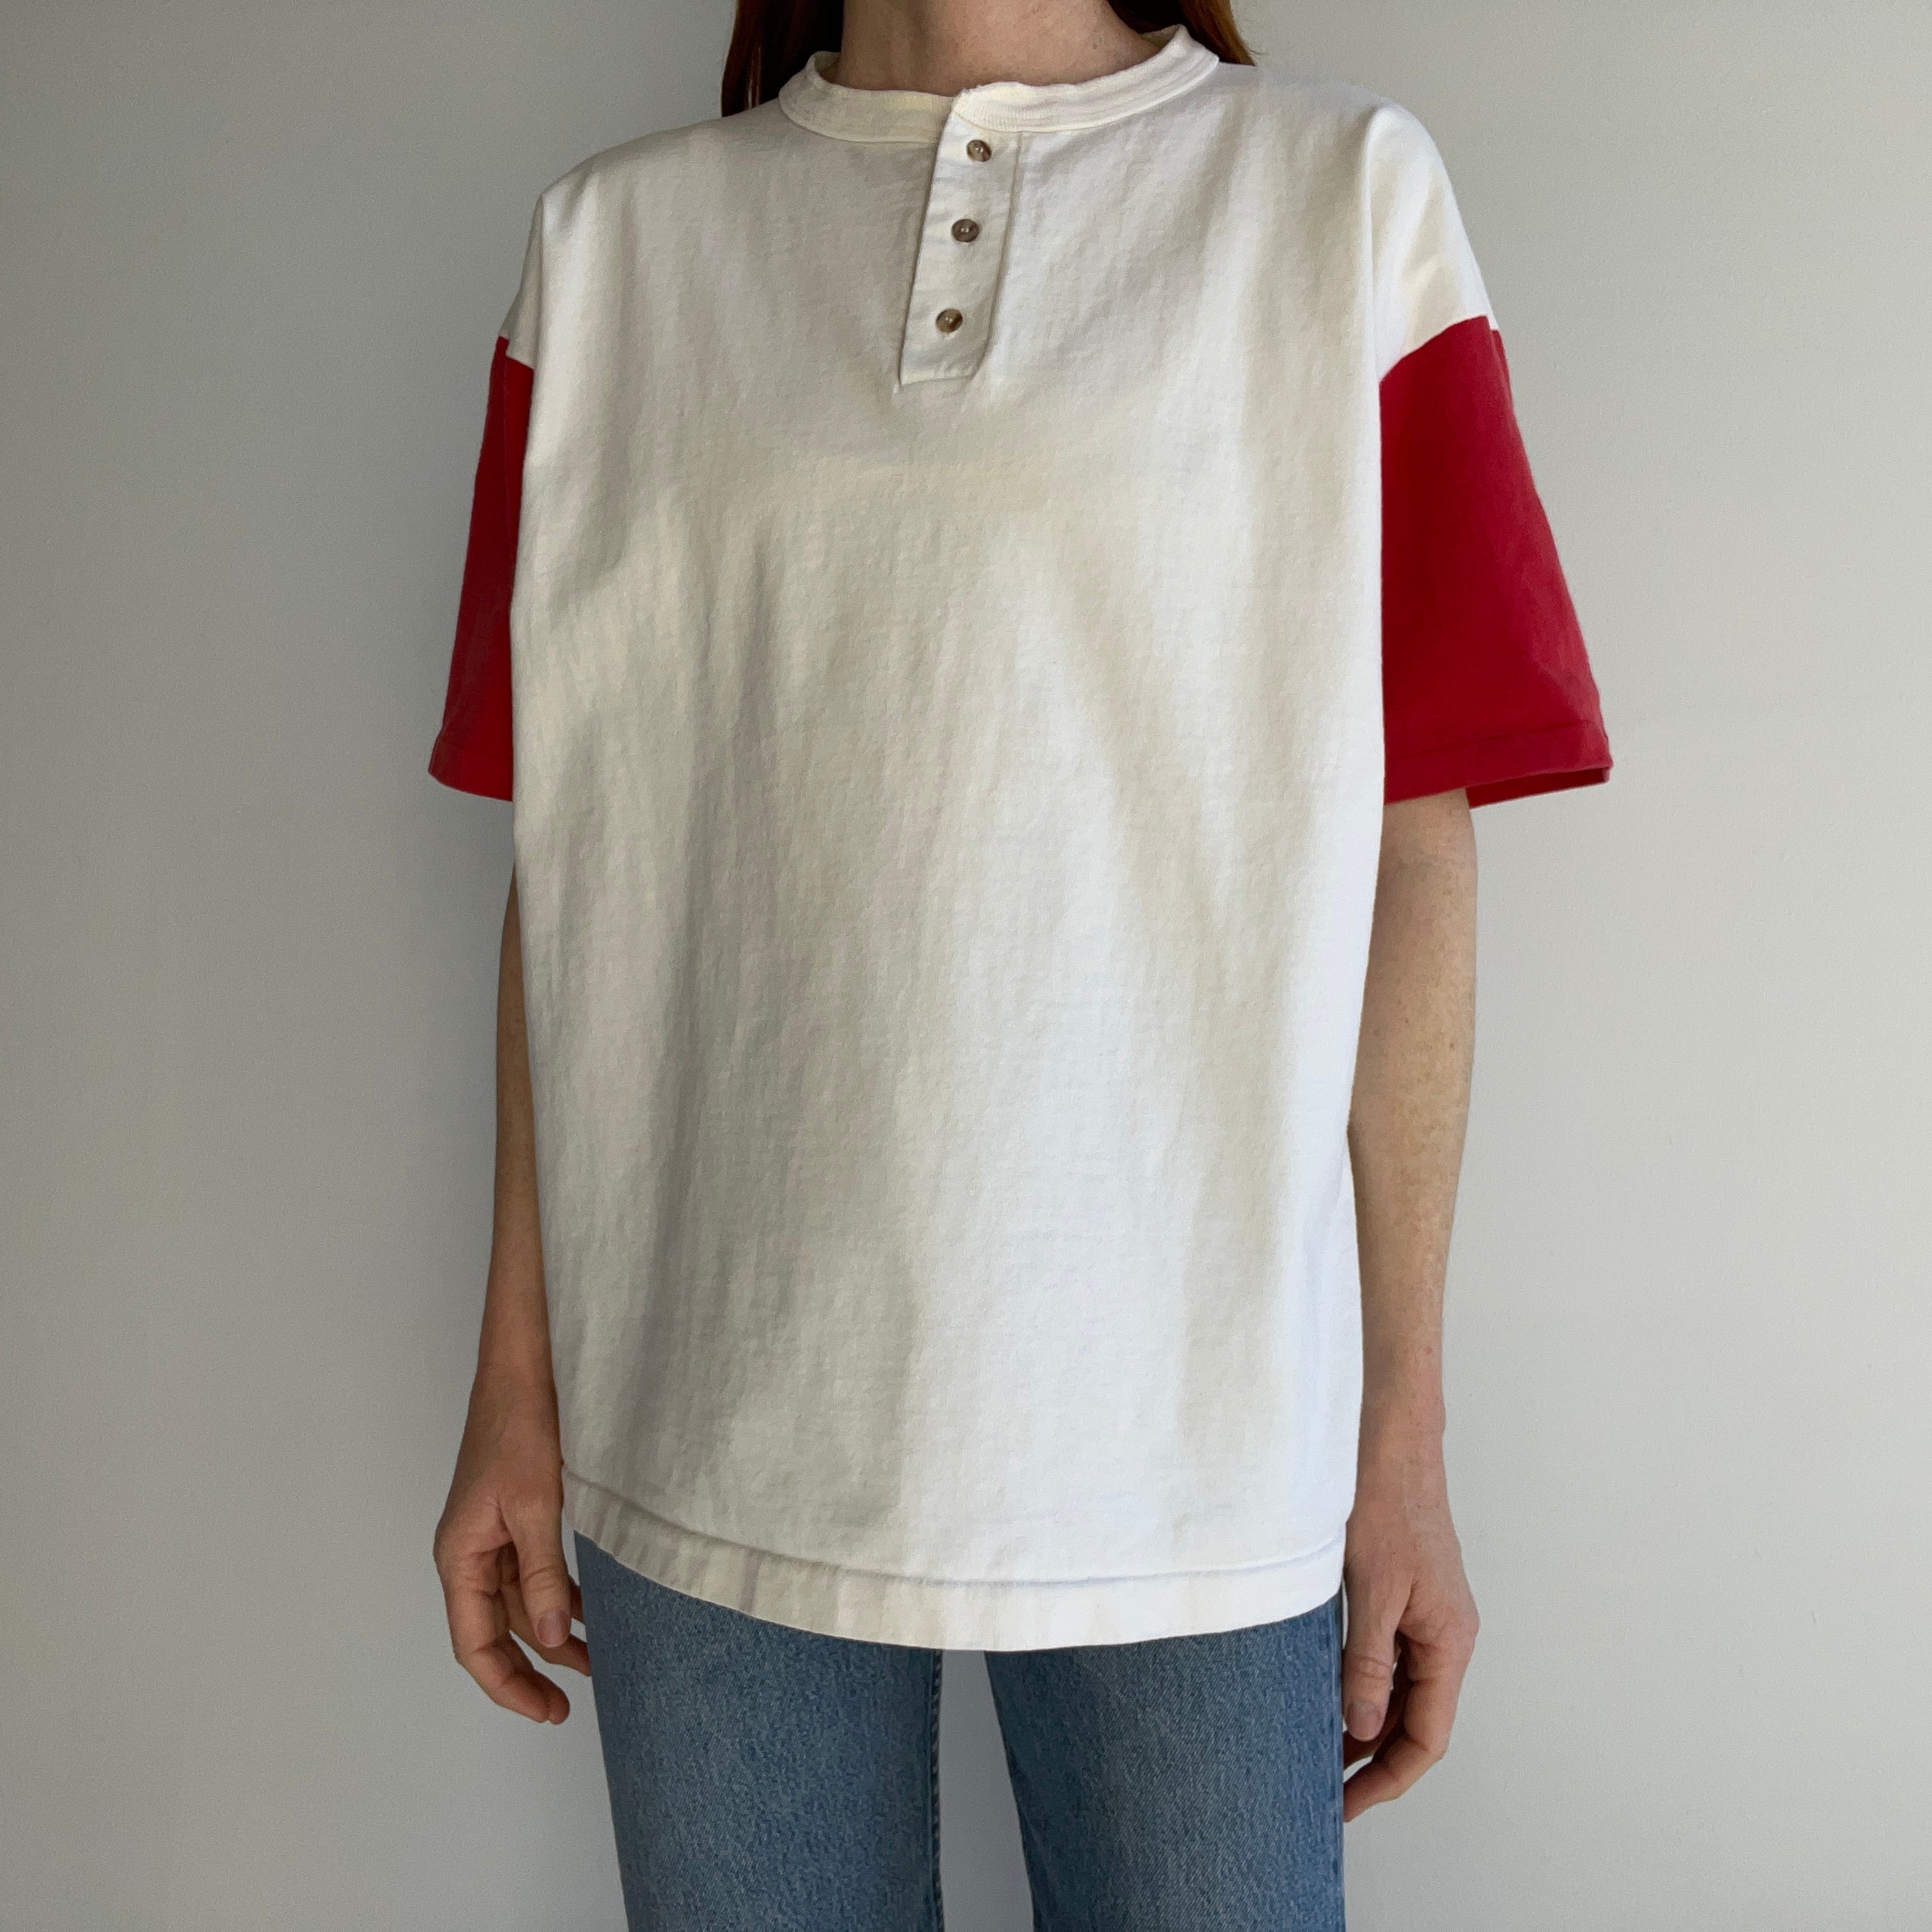 1990s Red and Off White Heavyweight Henley T-Shirt